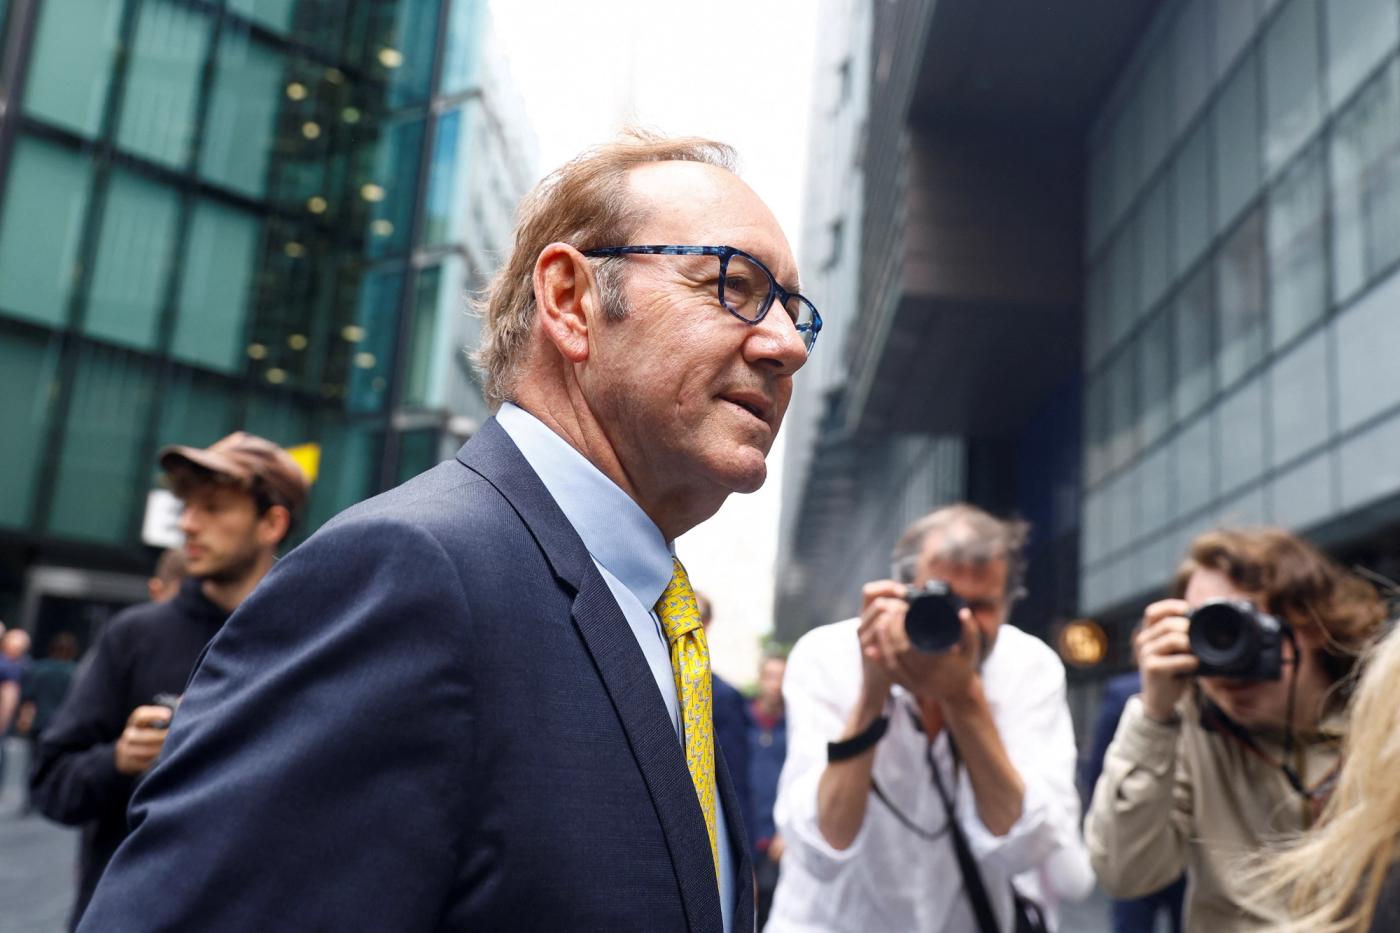 Actor Kevin Spacey walks outside Southwark Crown Court, as his trial over charges related to allegations of sex offences draws to a close, in London, Britain, July 25, 2023. REUTERS/Peter Cziborra